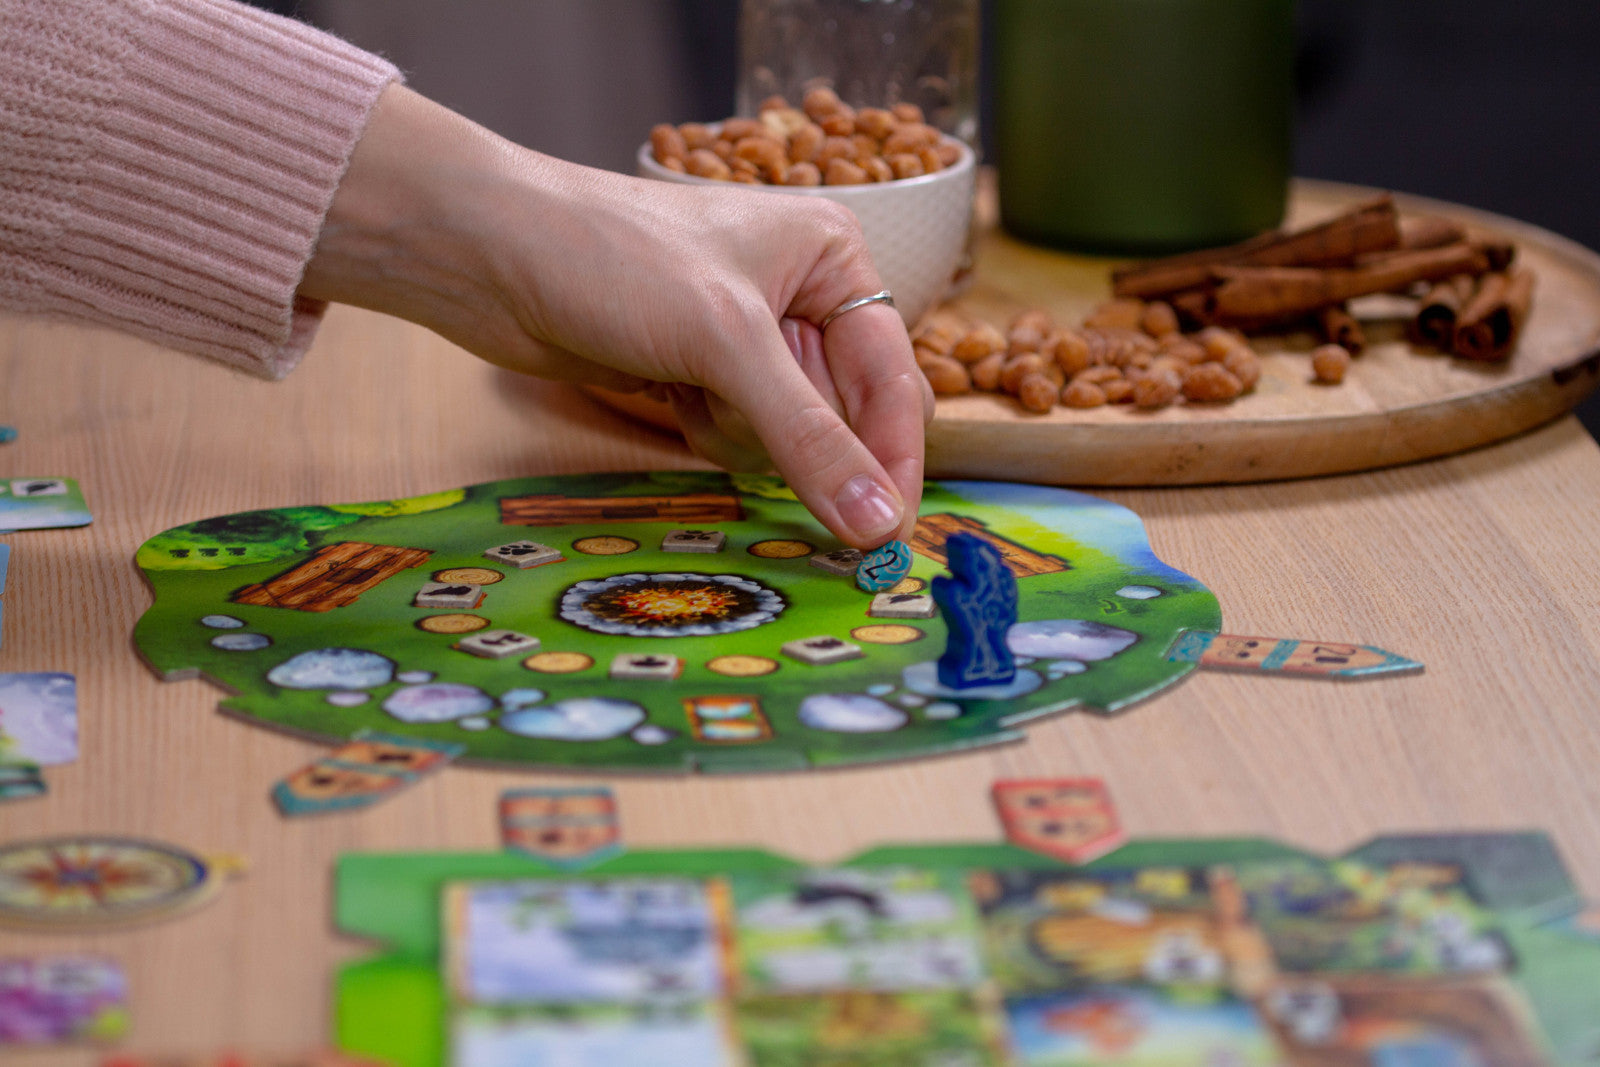 Playing the board game meadow